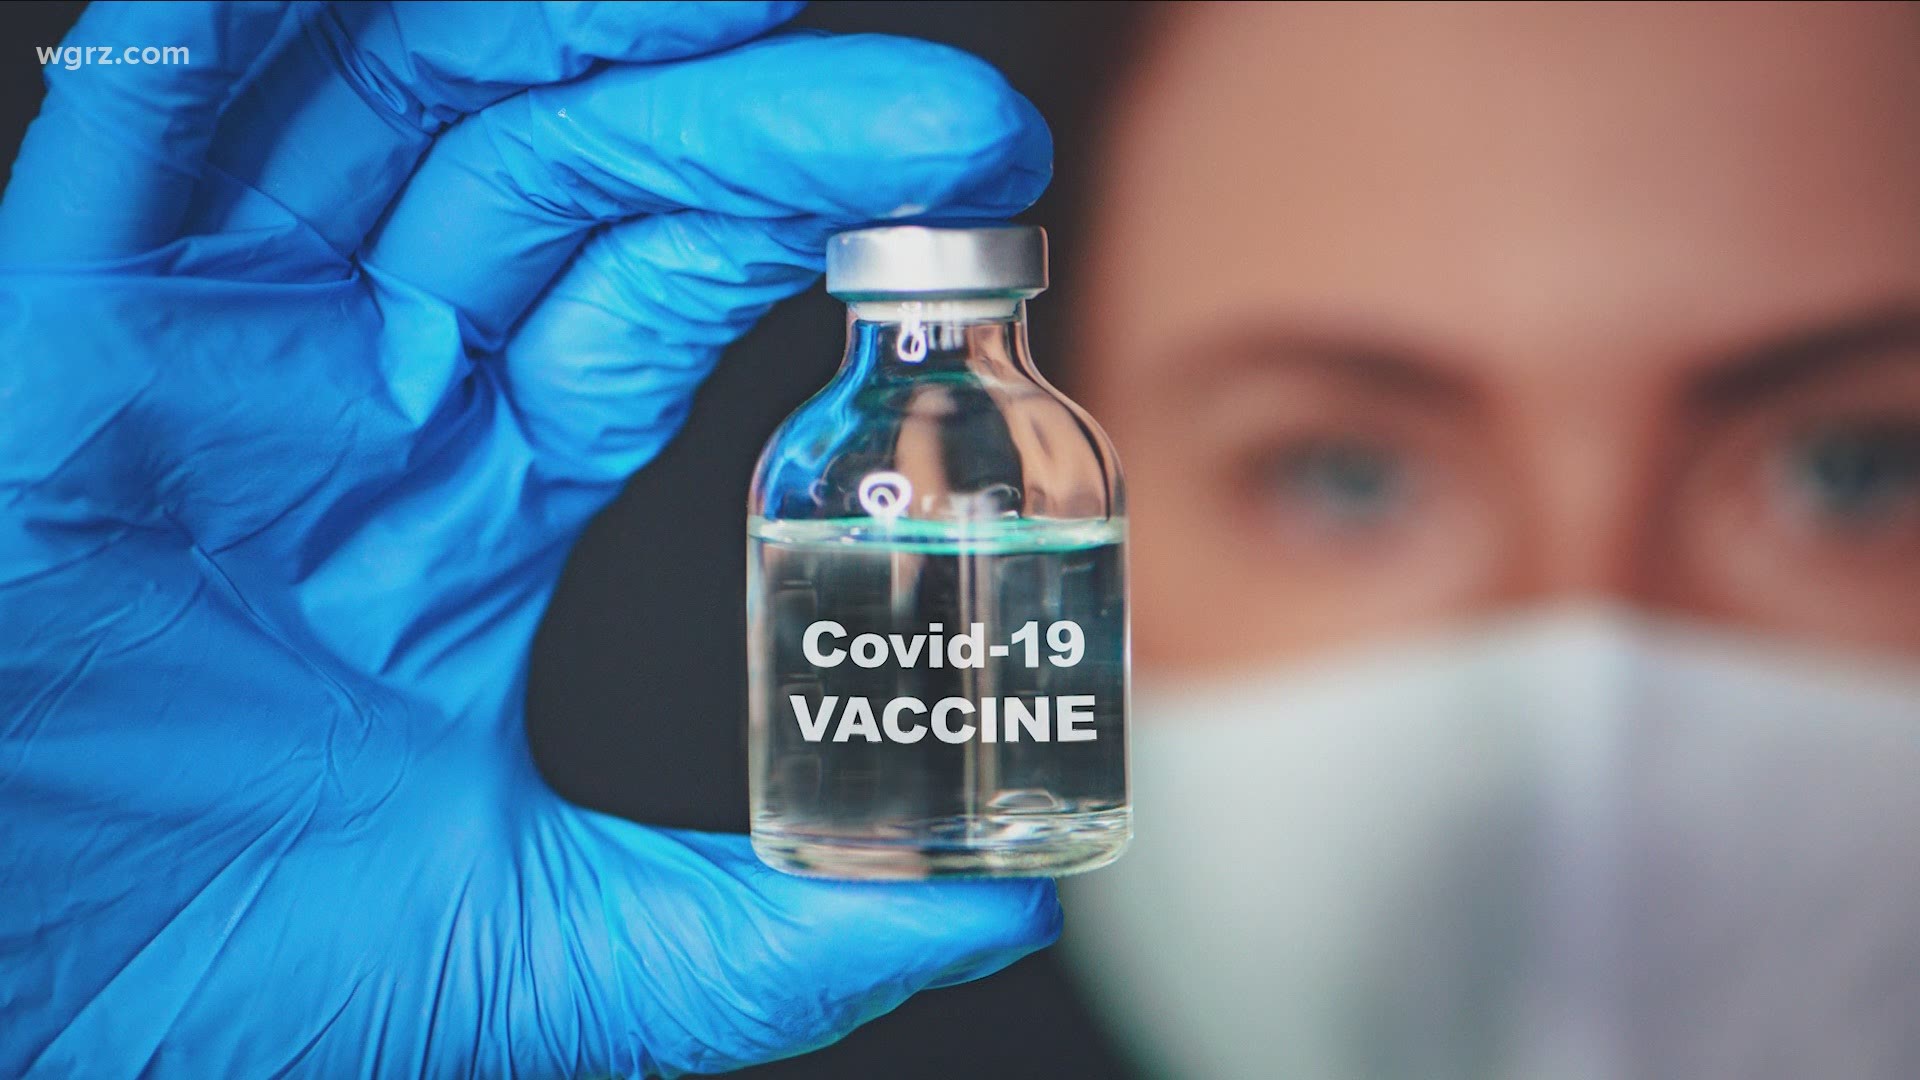 In the race to develop a vaccine for Covid-19, pharmaceutical company Pfizer released some very promising news about its efforts.